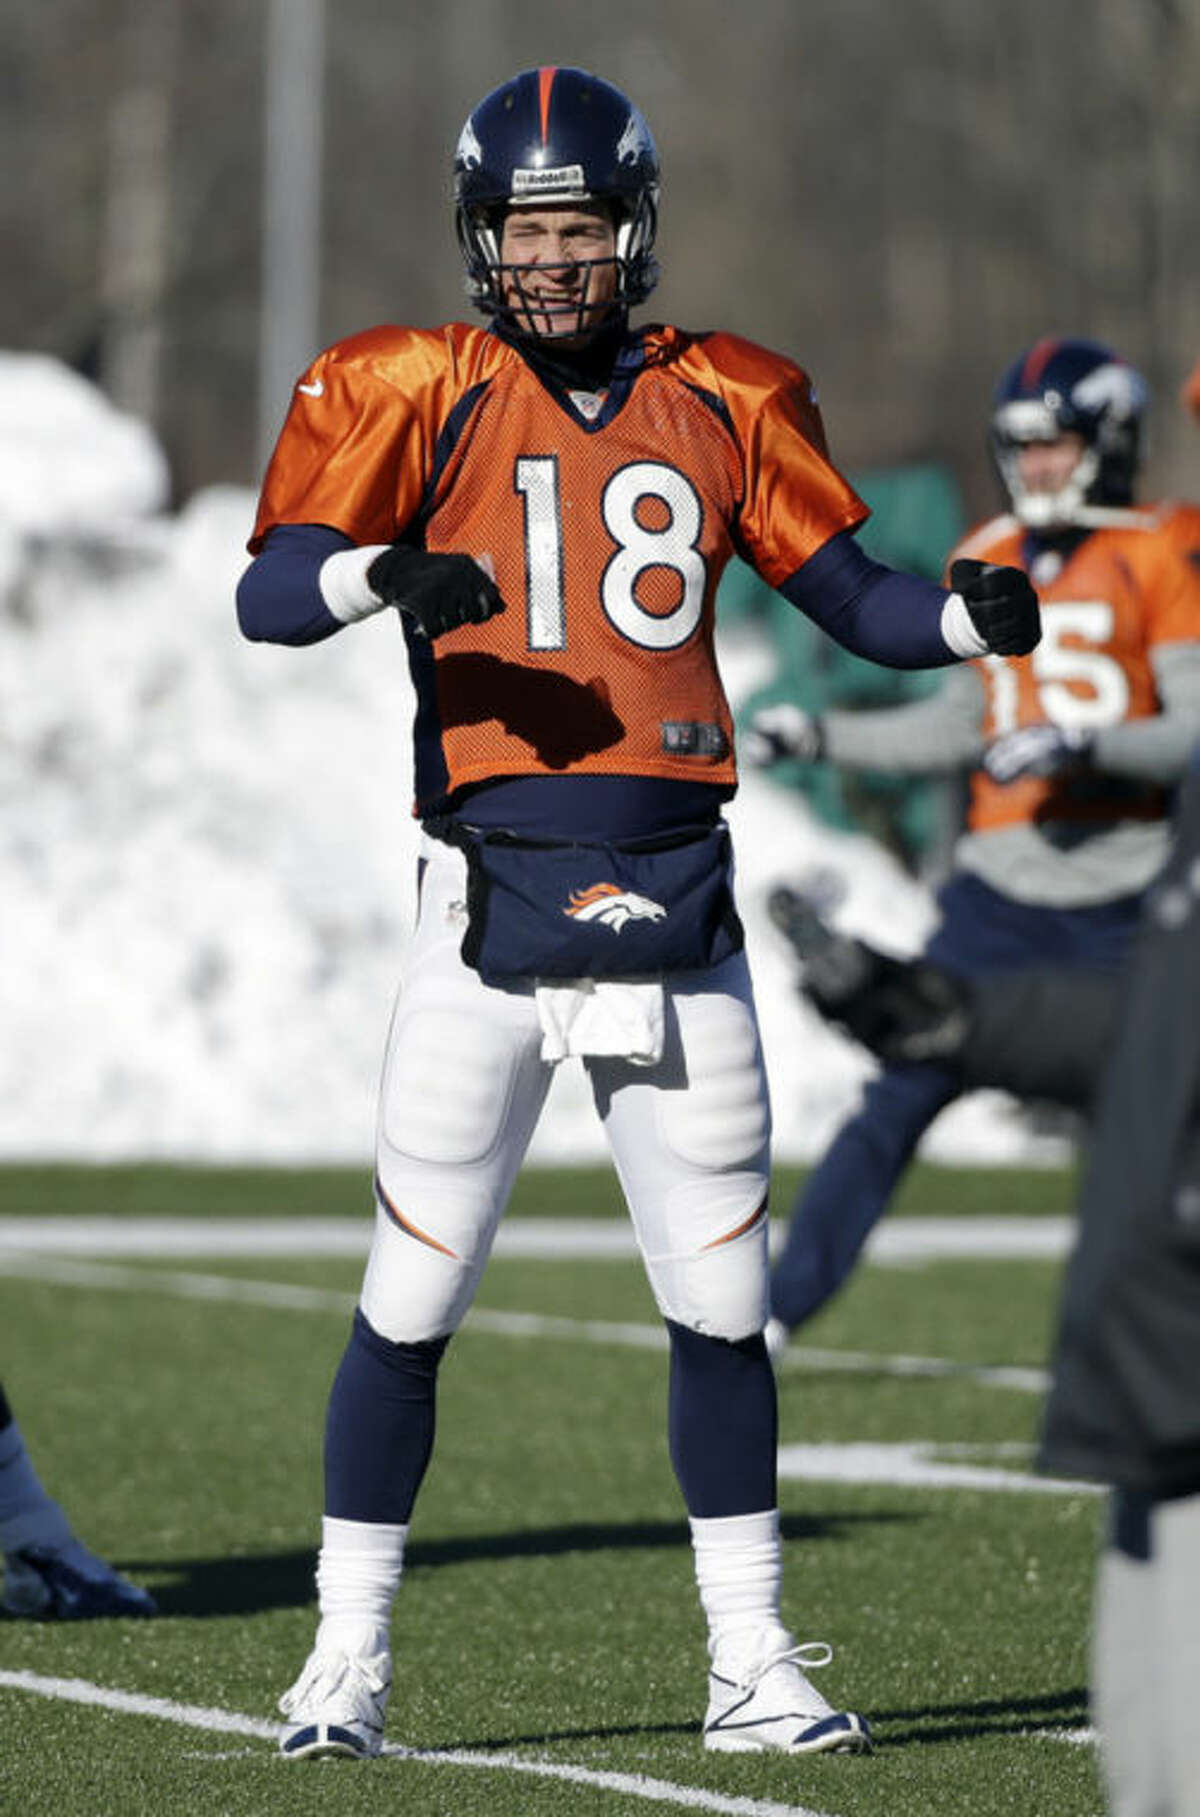 Denver Broncos quarterback Peyton Manning (18) stretches during practice Wednesday, Jan. 29, 2014, in Florham Park, N.J. The Broncos are scheduled to play the Seattle Seahawks in the NFL Super Bowl XLVIII football game Sunday, Feb. 2, in East Rutherford, N.J. (AP Photo/Mark Humphrey)